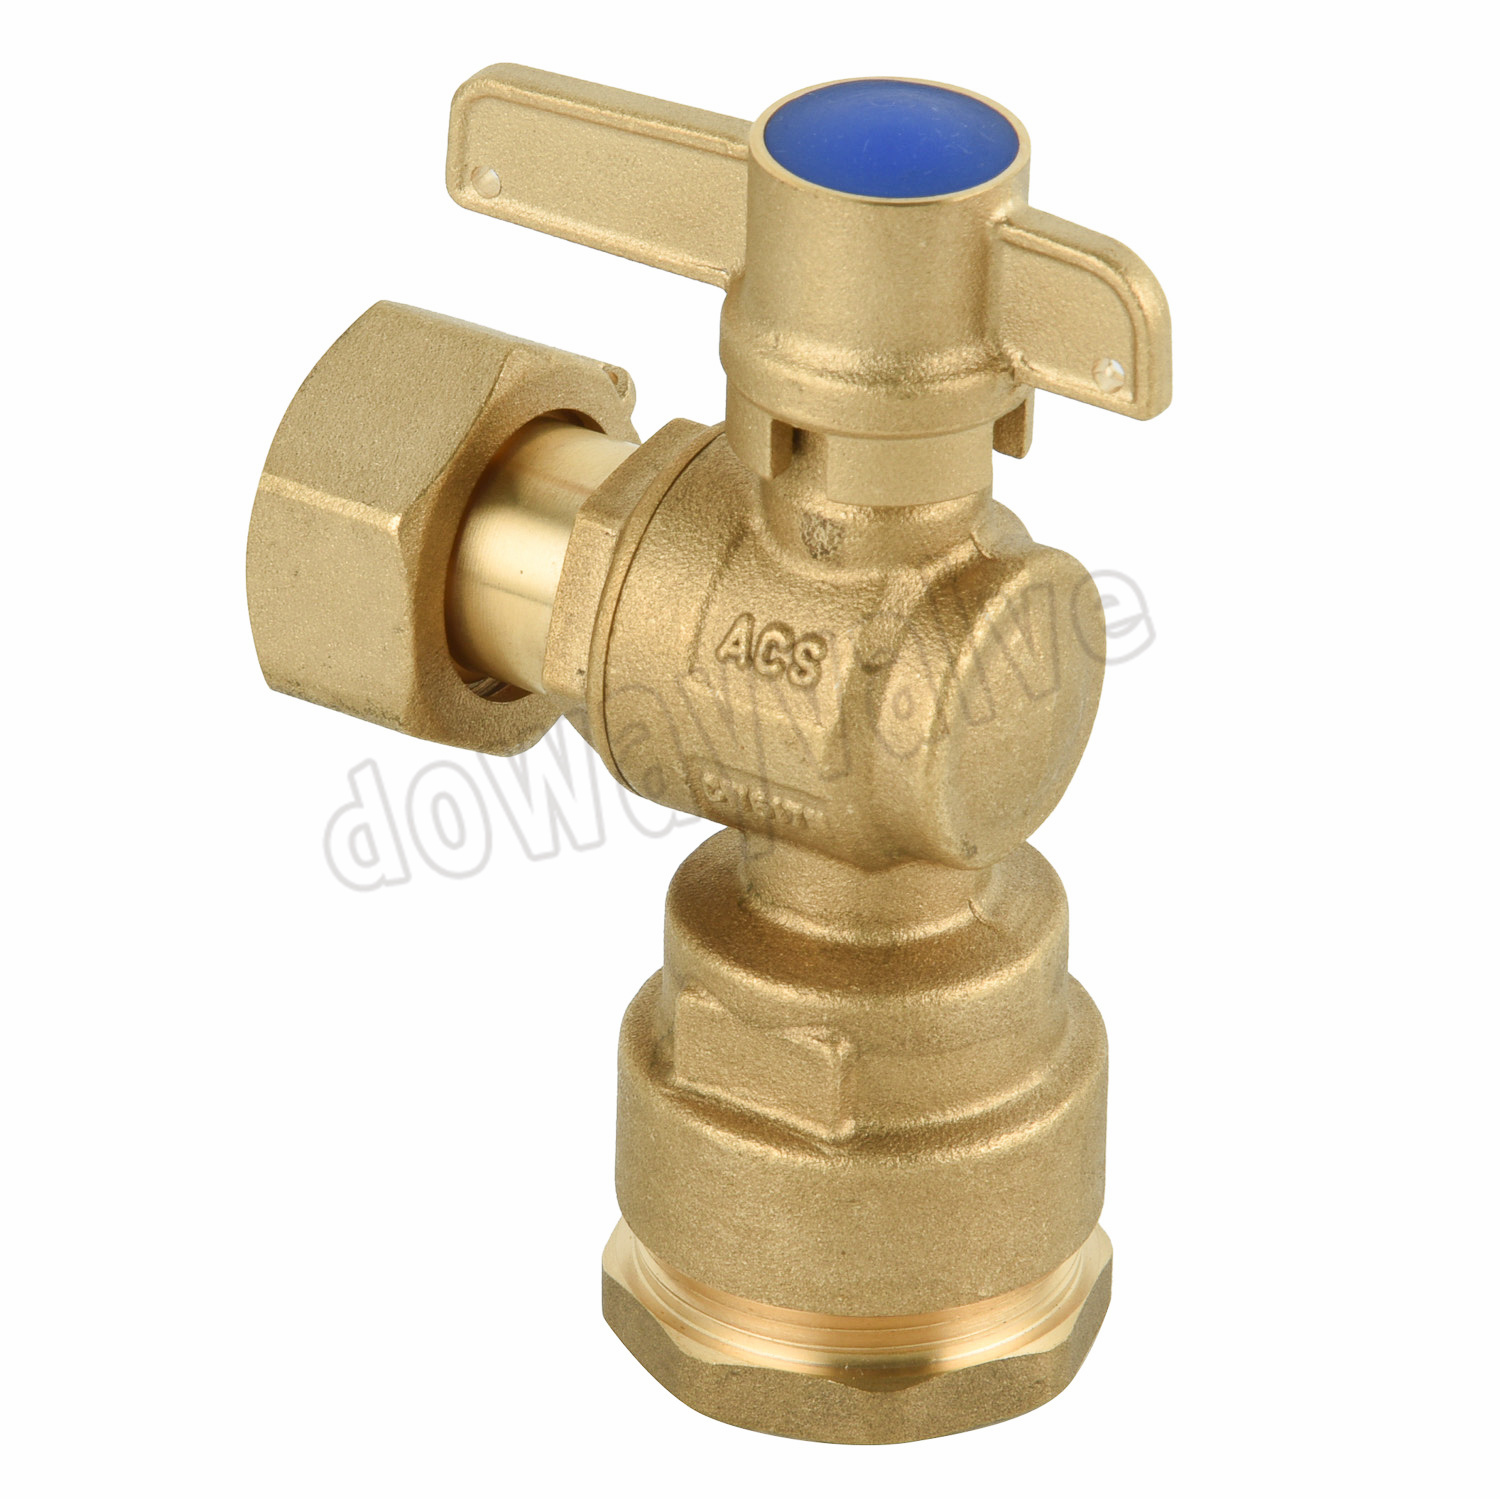 Acs Approval Straight Type Male Lockable Water Meter Ball Valve PE25 China Factory